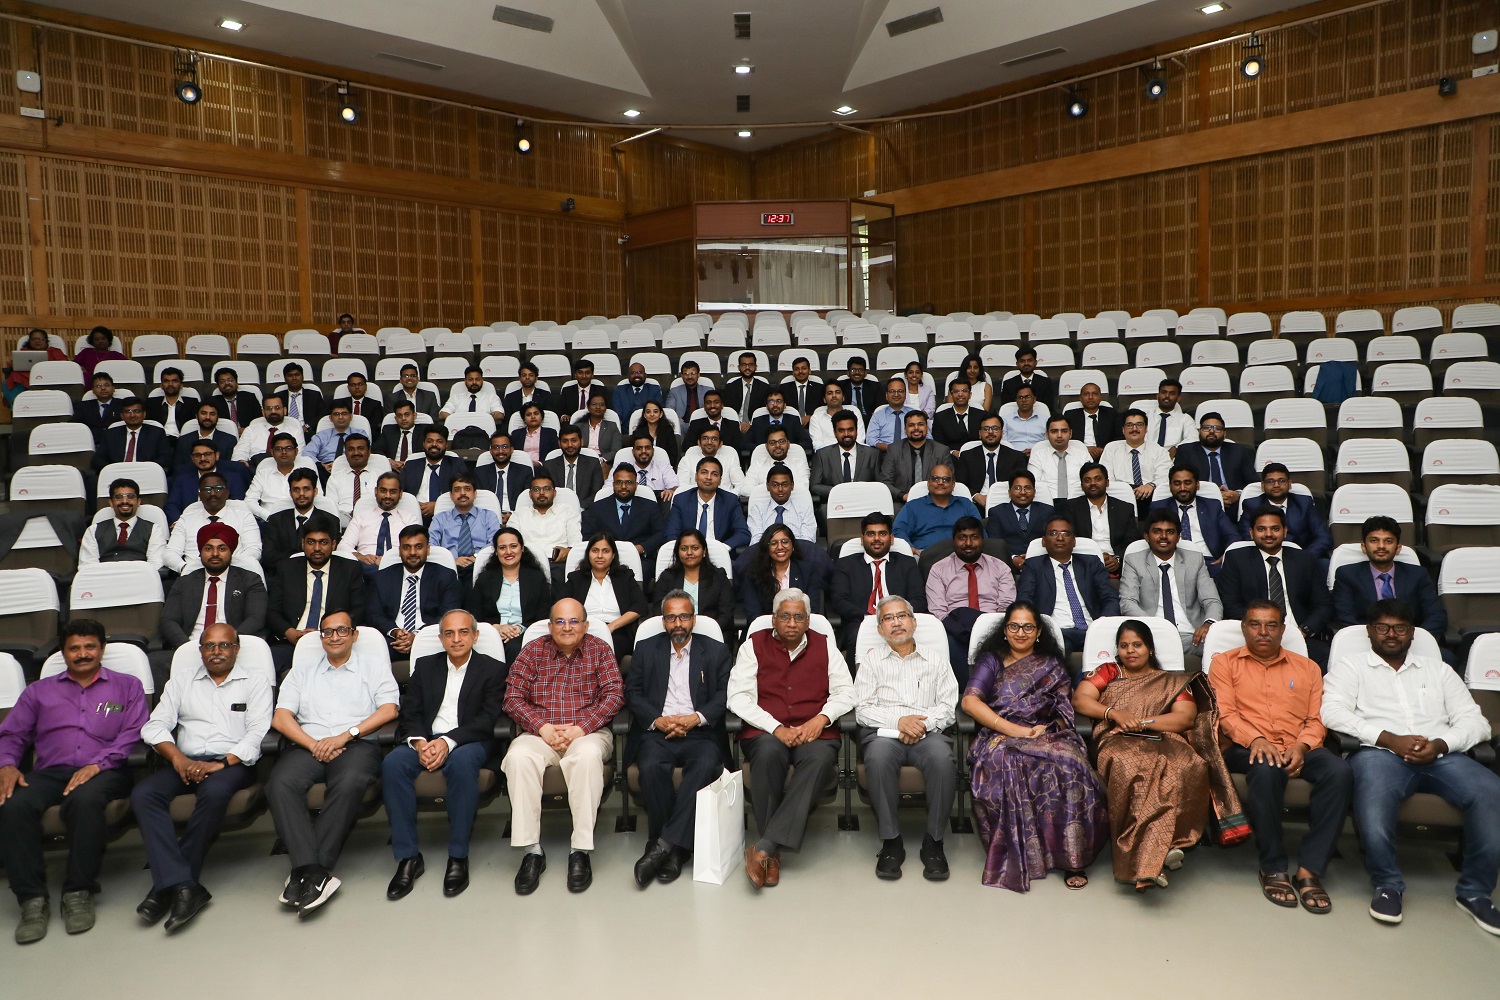 Group photo of EPGP students with Faculties and staffs, at the inauguration of the EPGP Program on 25th March 2023.